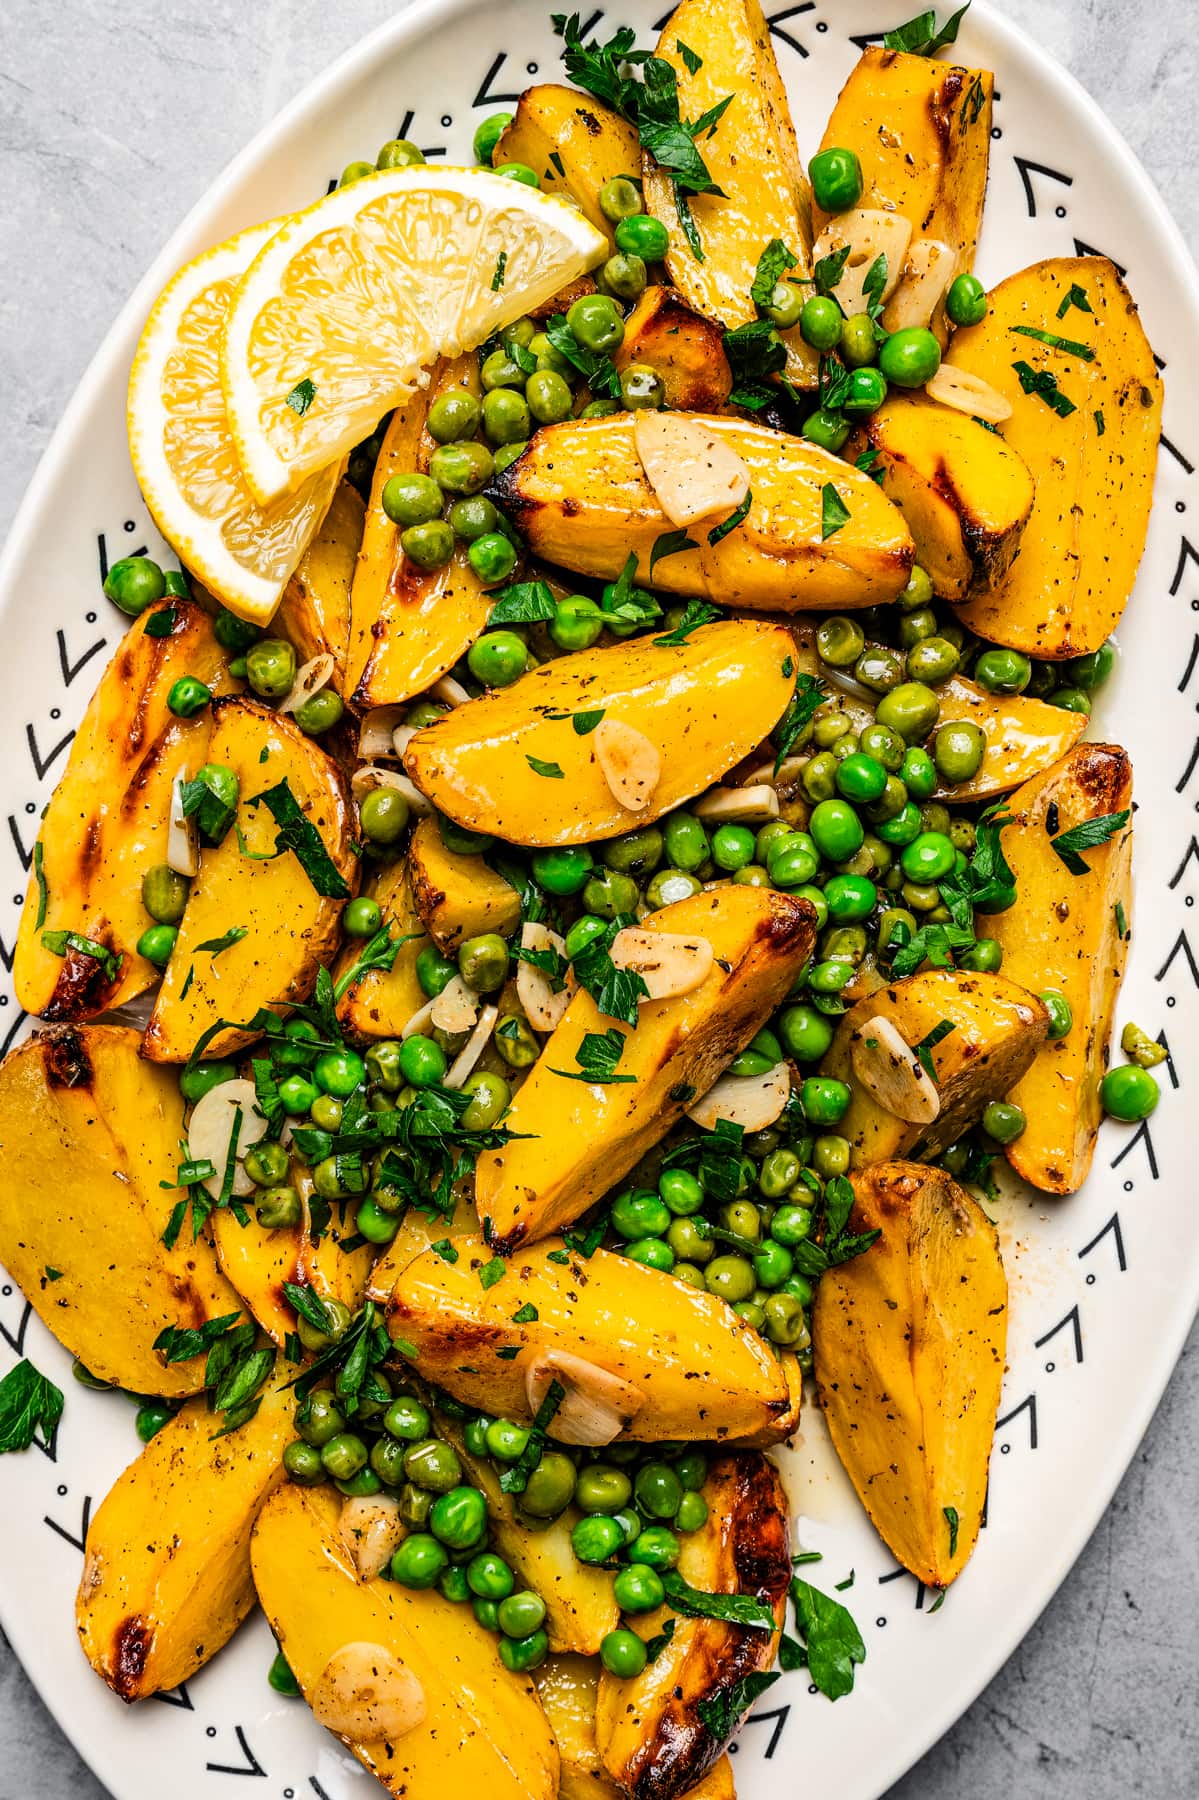 Overhead image of Vesuvio potatoes on a serving platter with lemon slices and serving spoons.